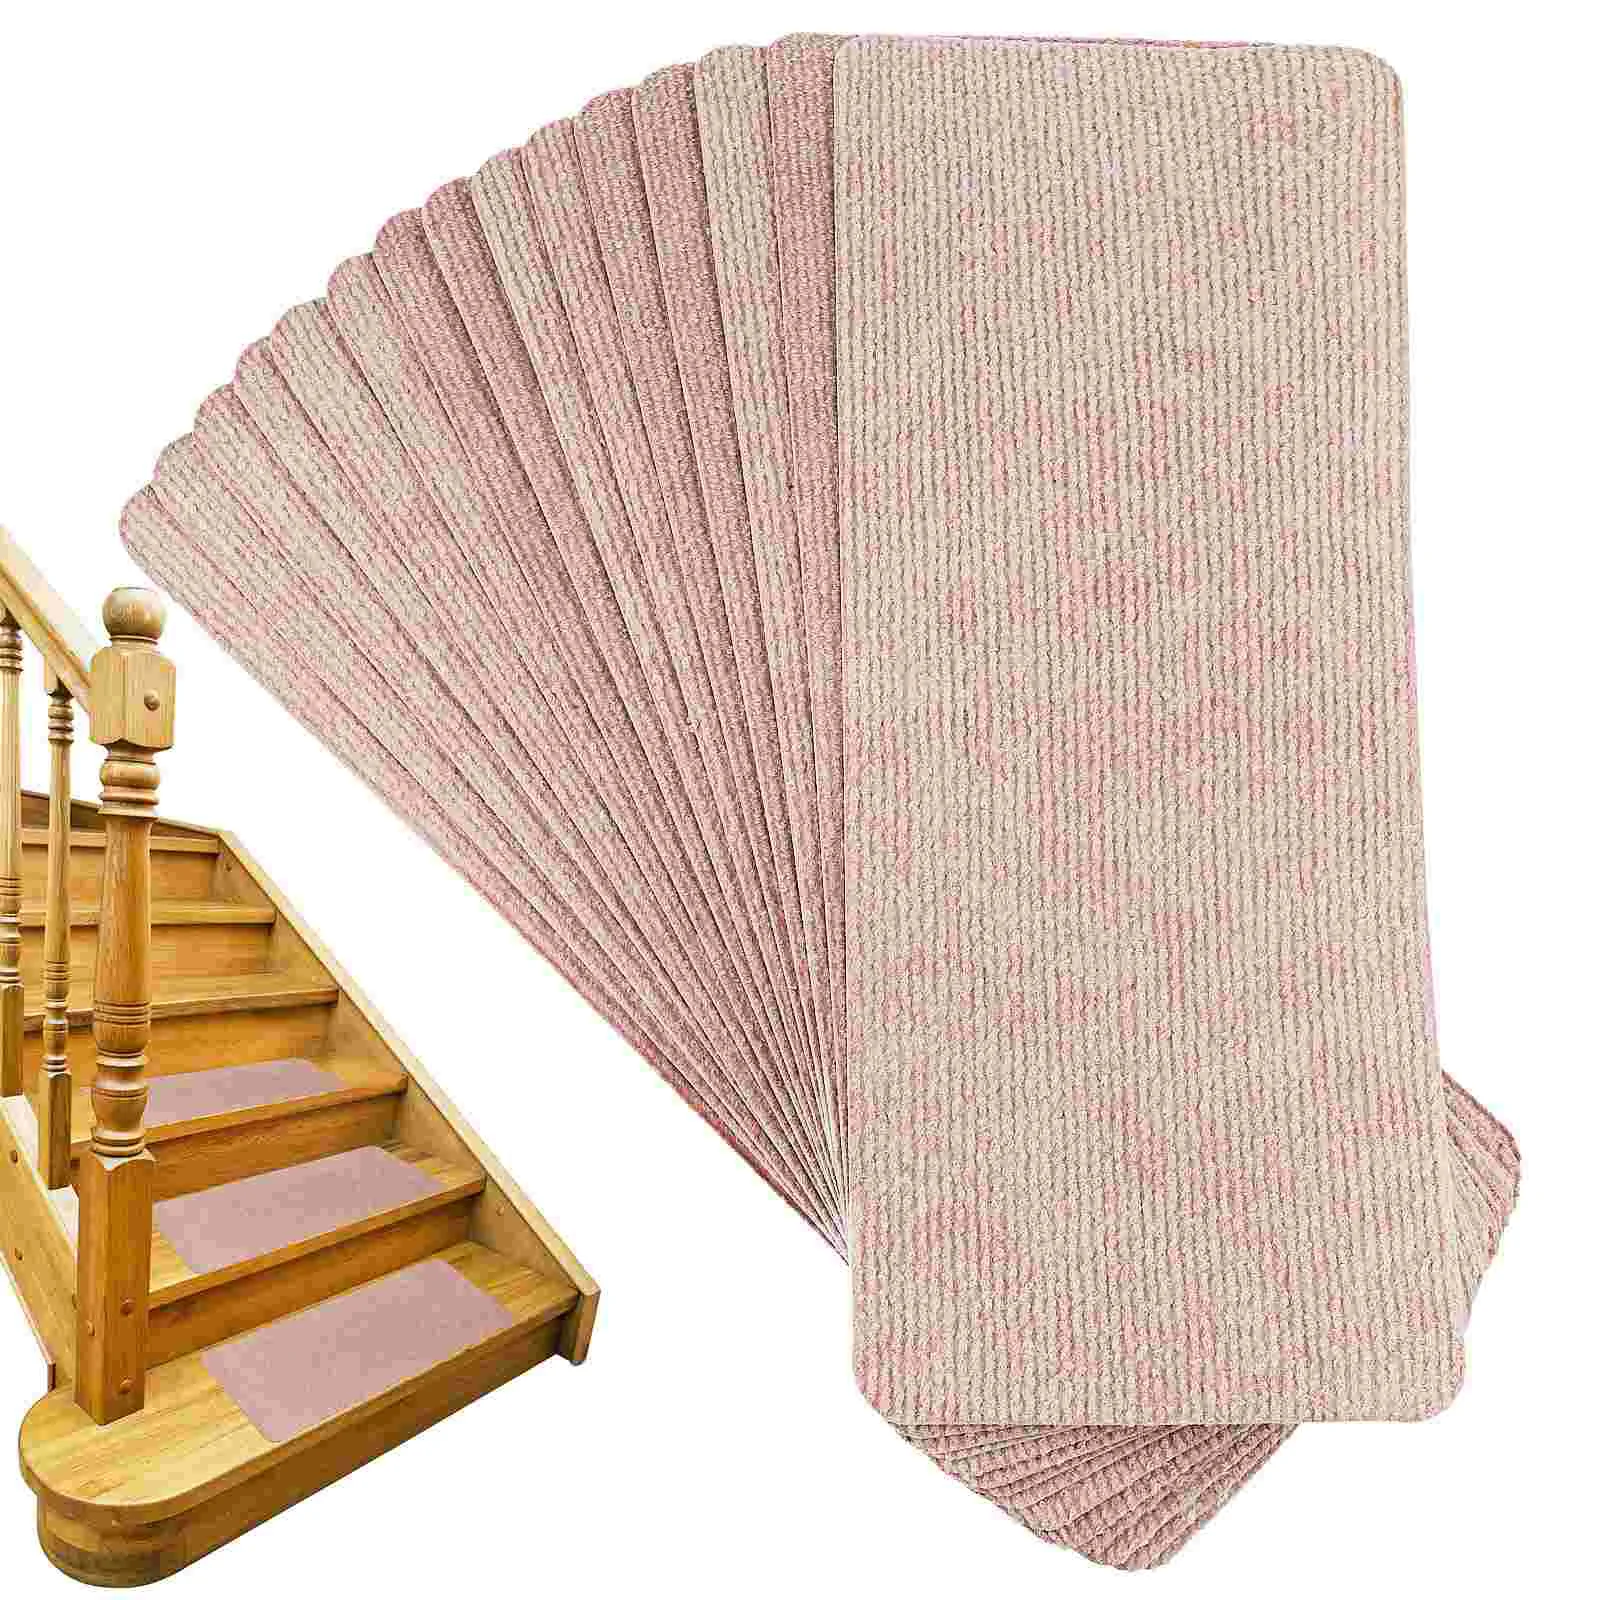 

15pcs Stairs Carpet Self Adhesive Stair Treads Staircase Covers Protectors Anti Slide Stair Carpet